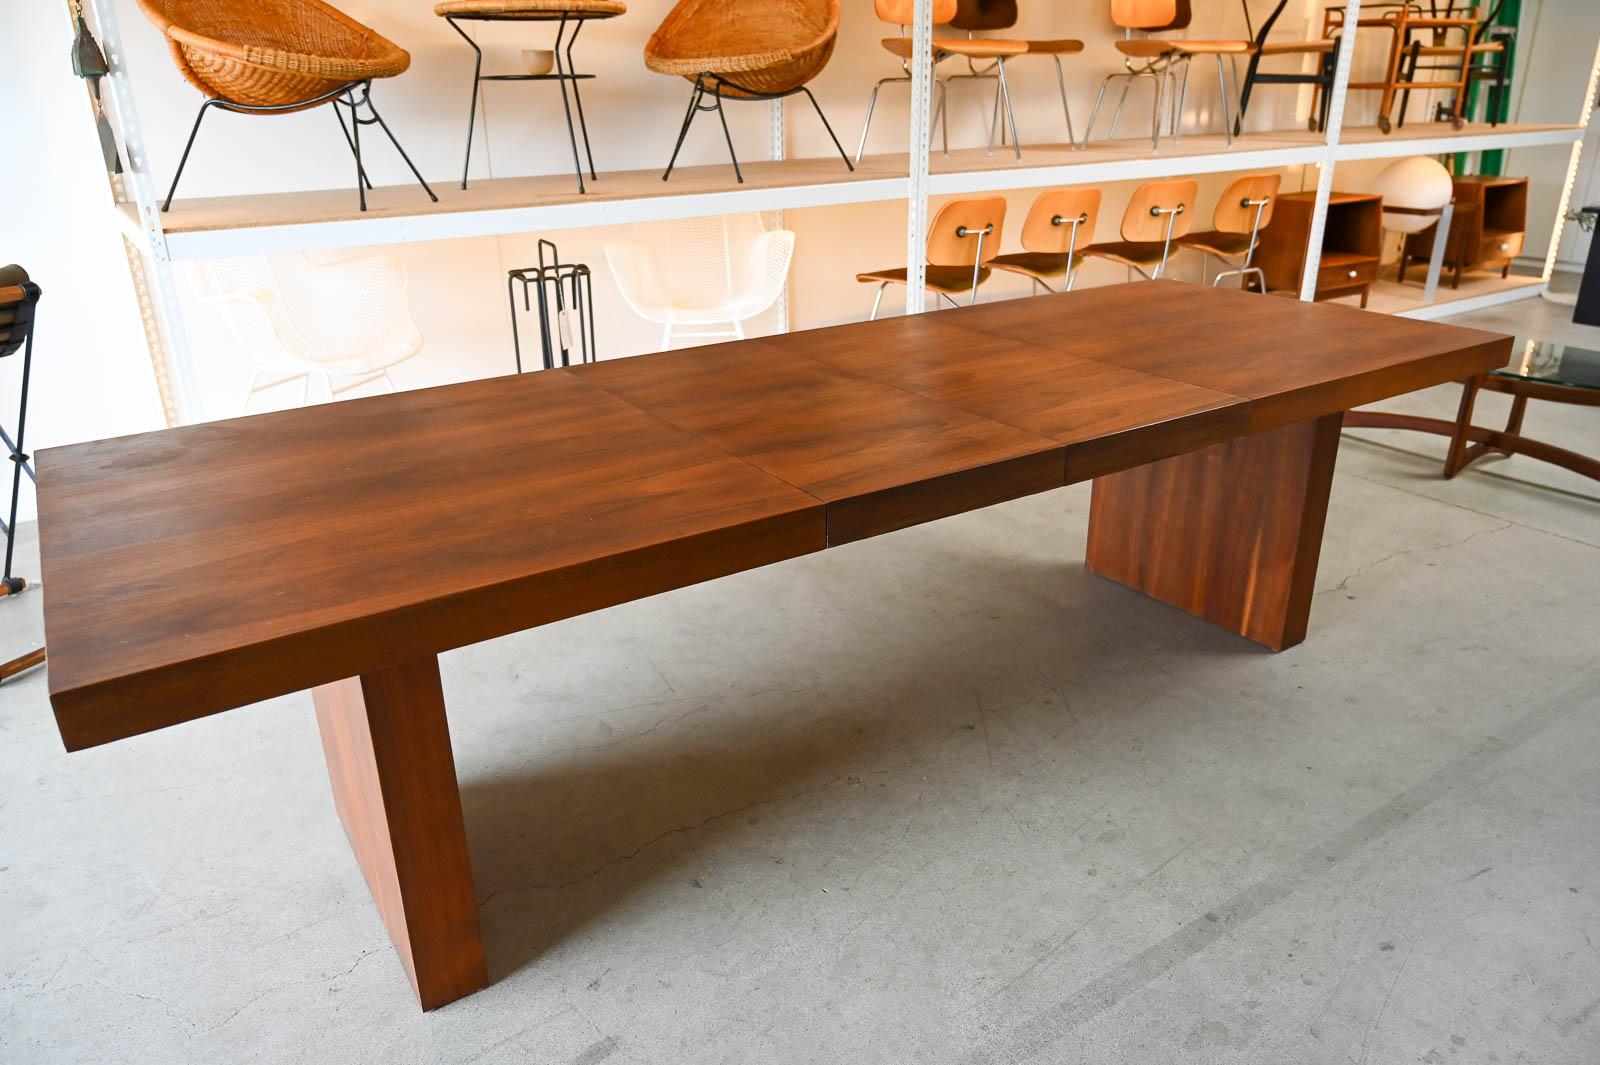 Mid-Century Modern Walnut Dining Table by Merton Gershun for Dillingham Esprit Collection, ca. 1970